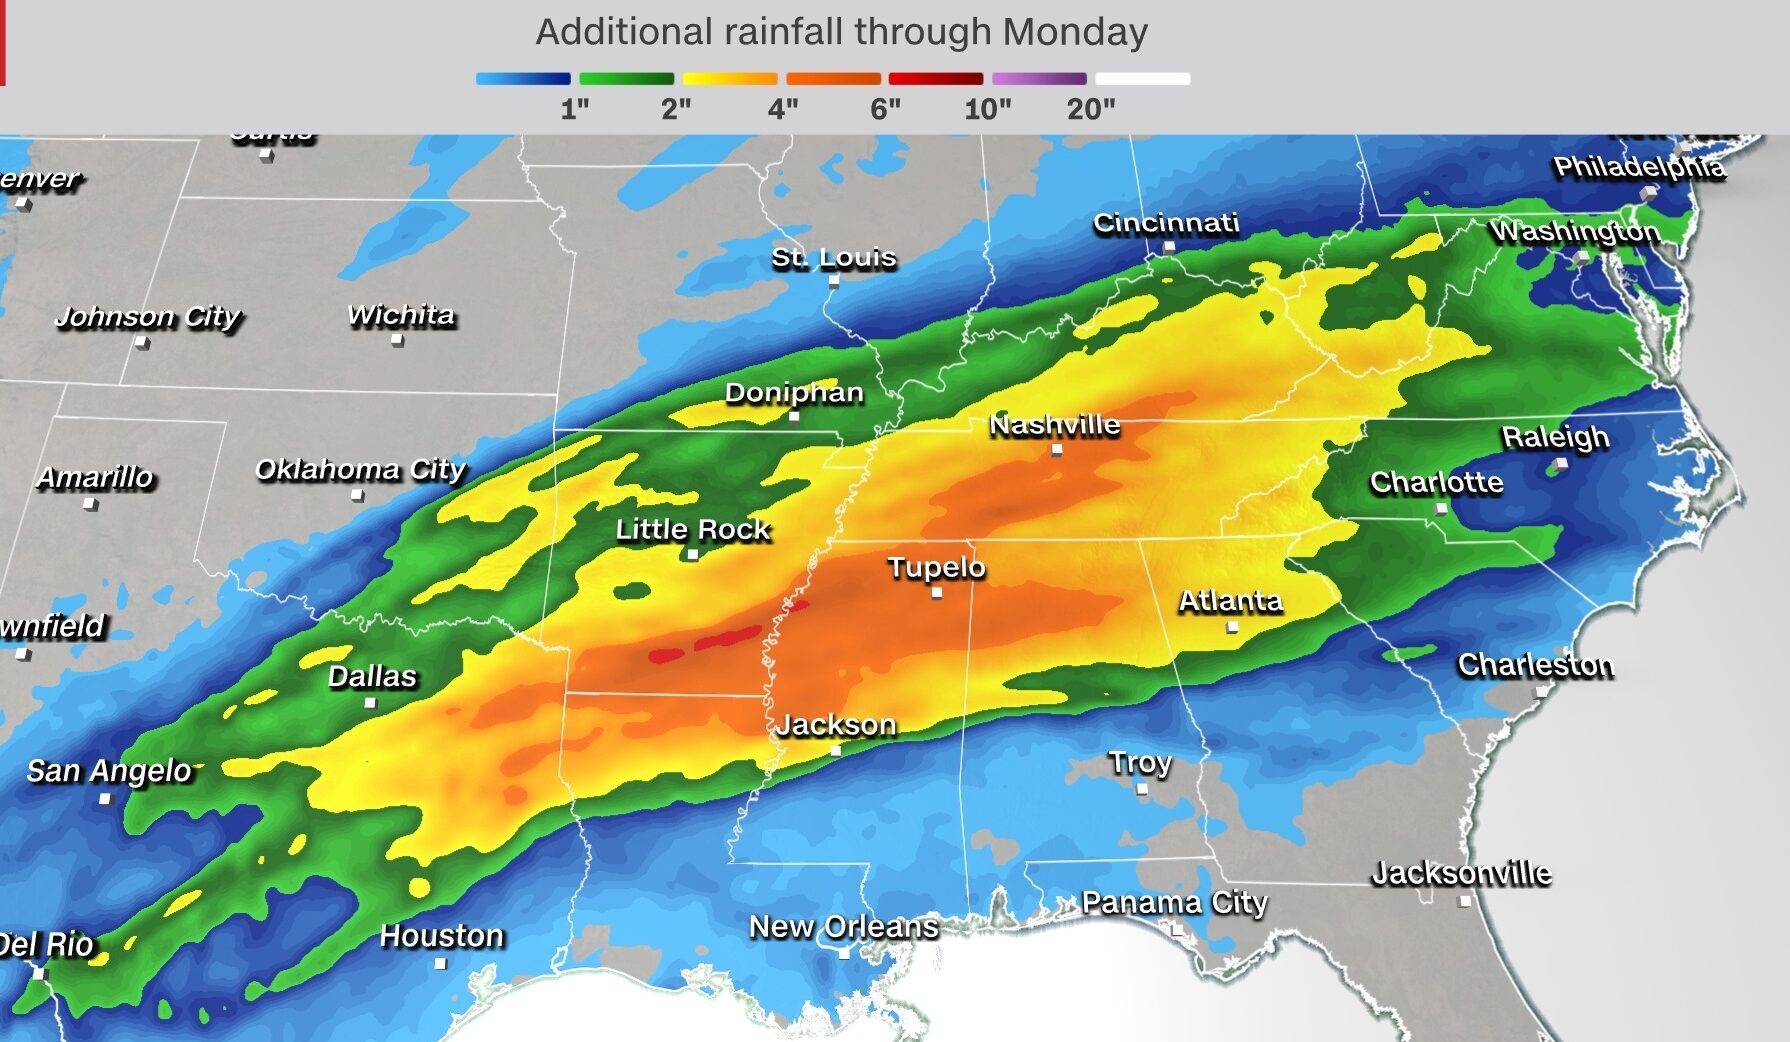 An Active Weather Pattern Returns to the South—This Time With Heavy Rain, Not Snow